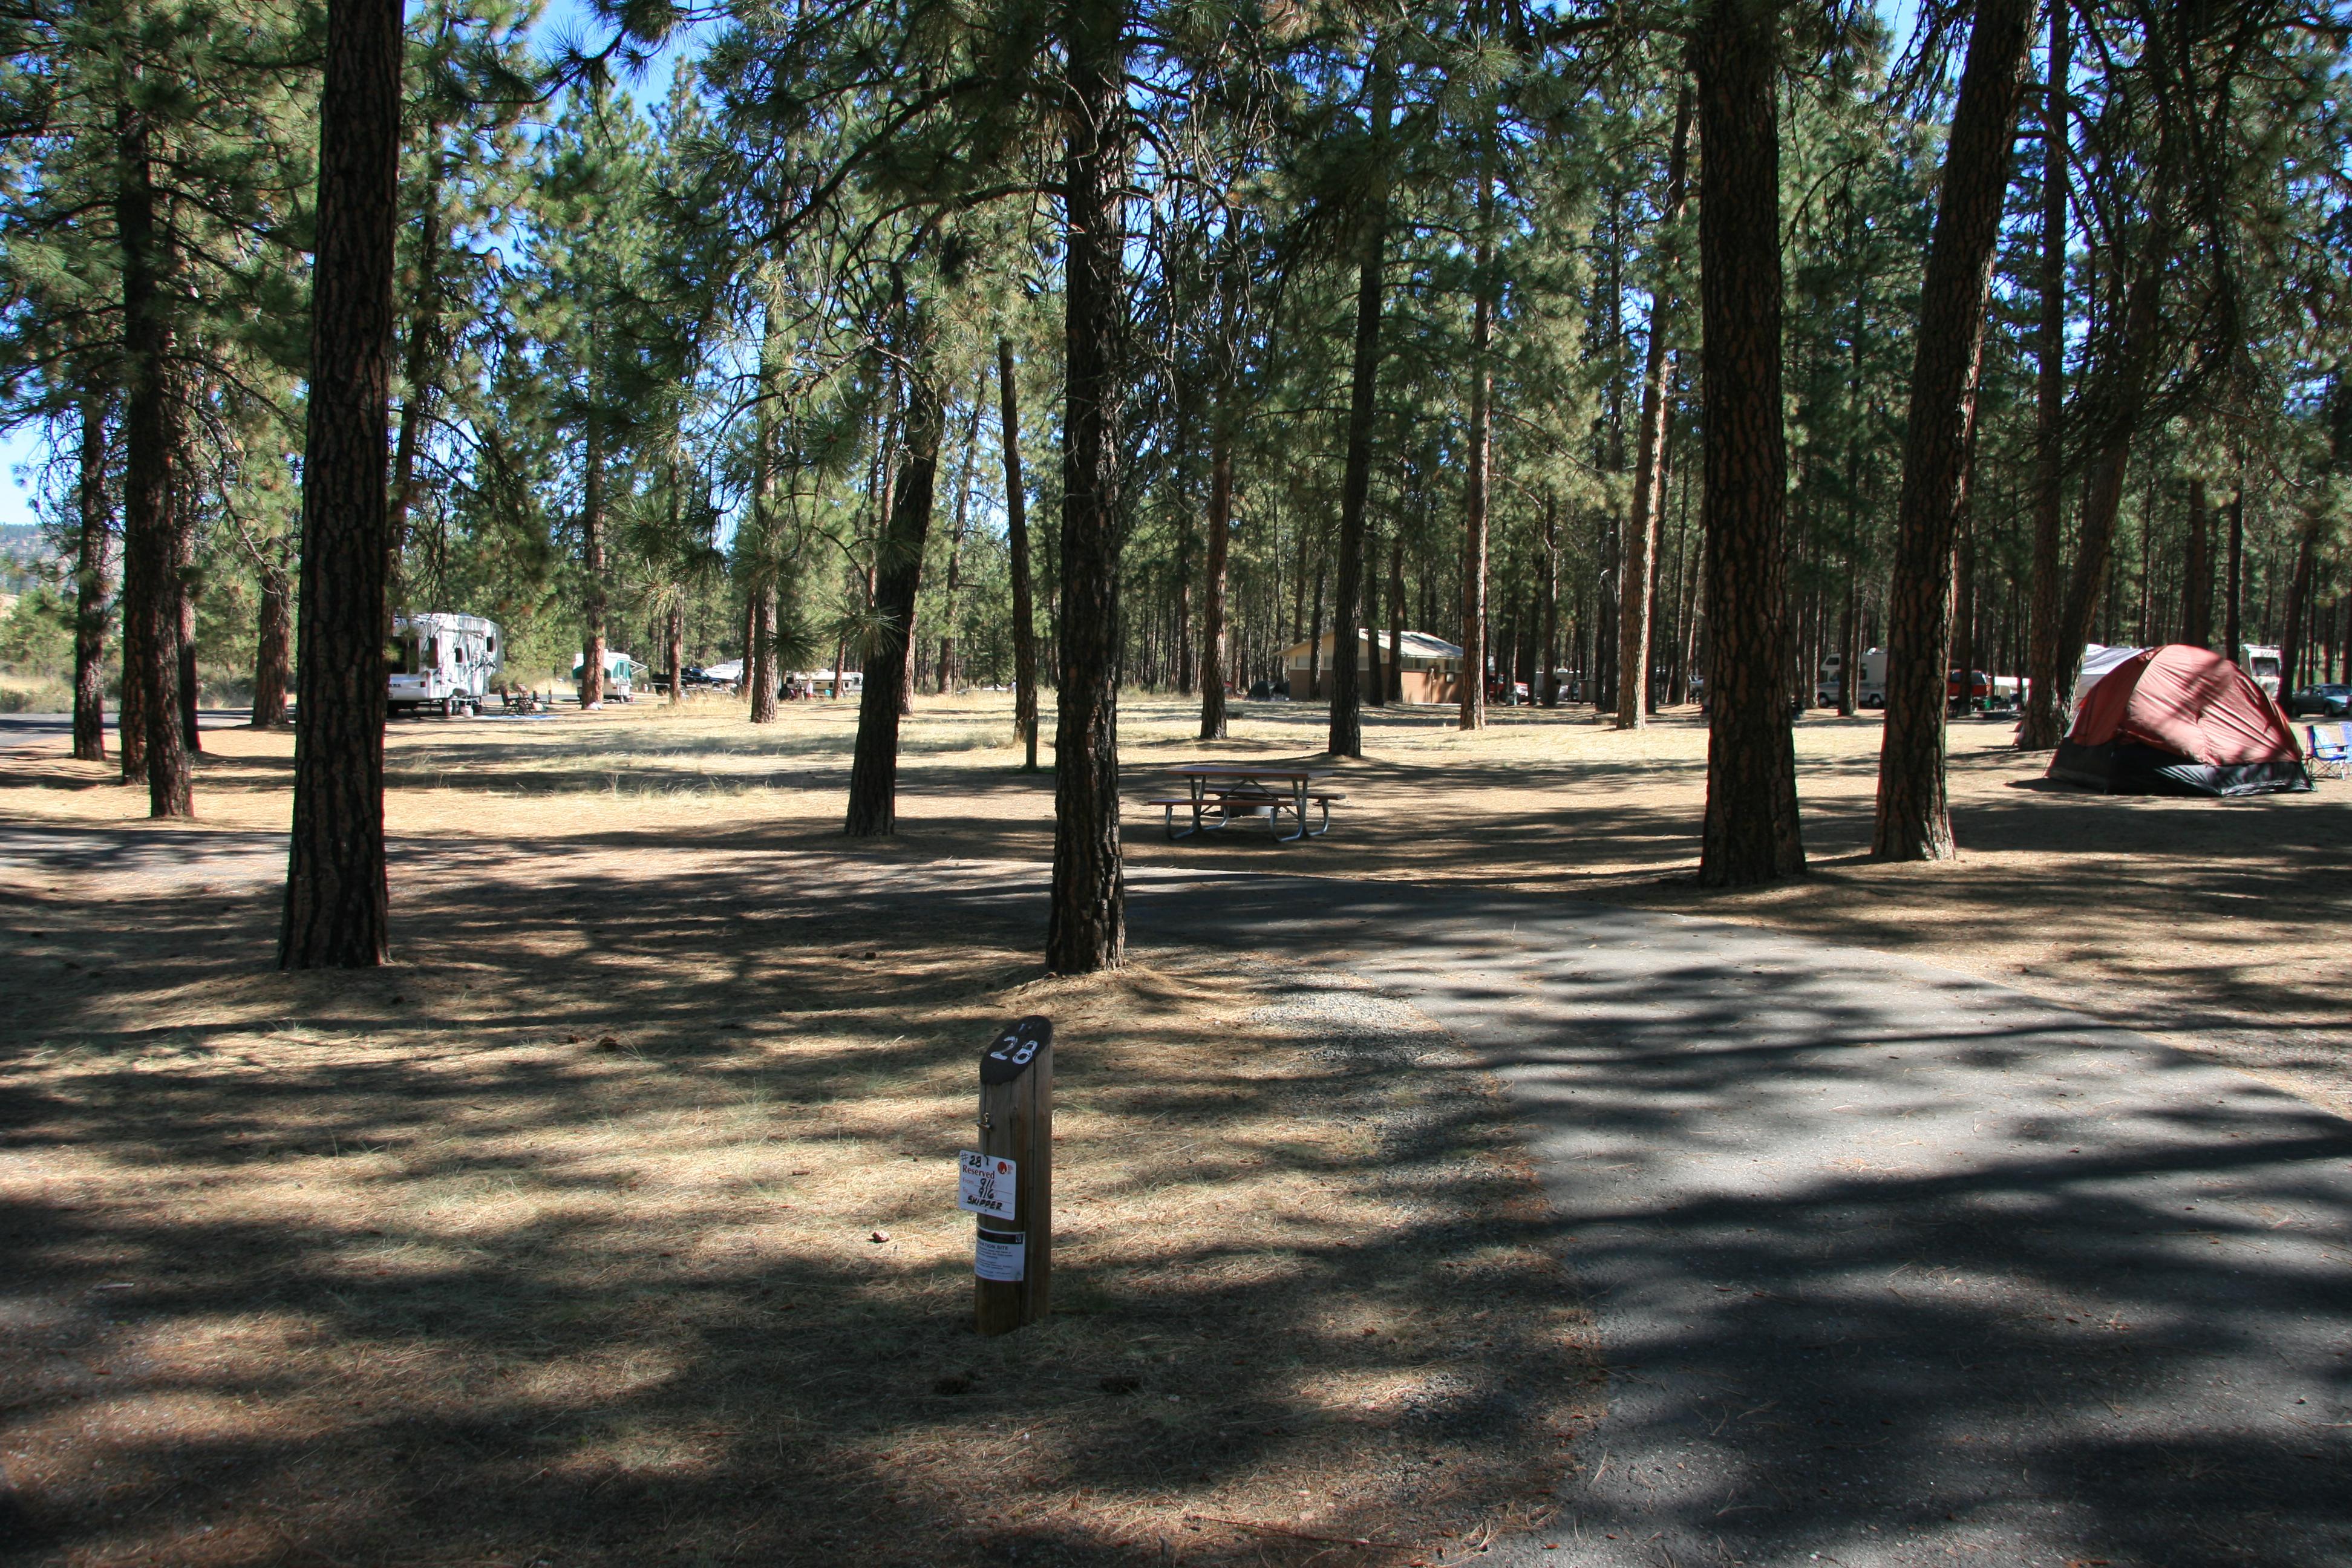 A view through the pines with campsites scattered throughout and a bathroom structure beyond.